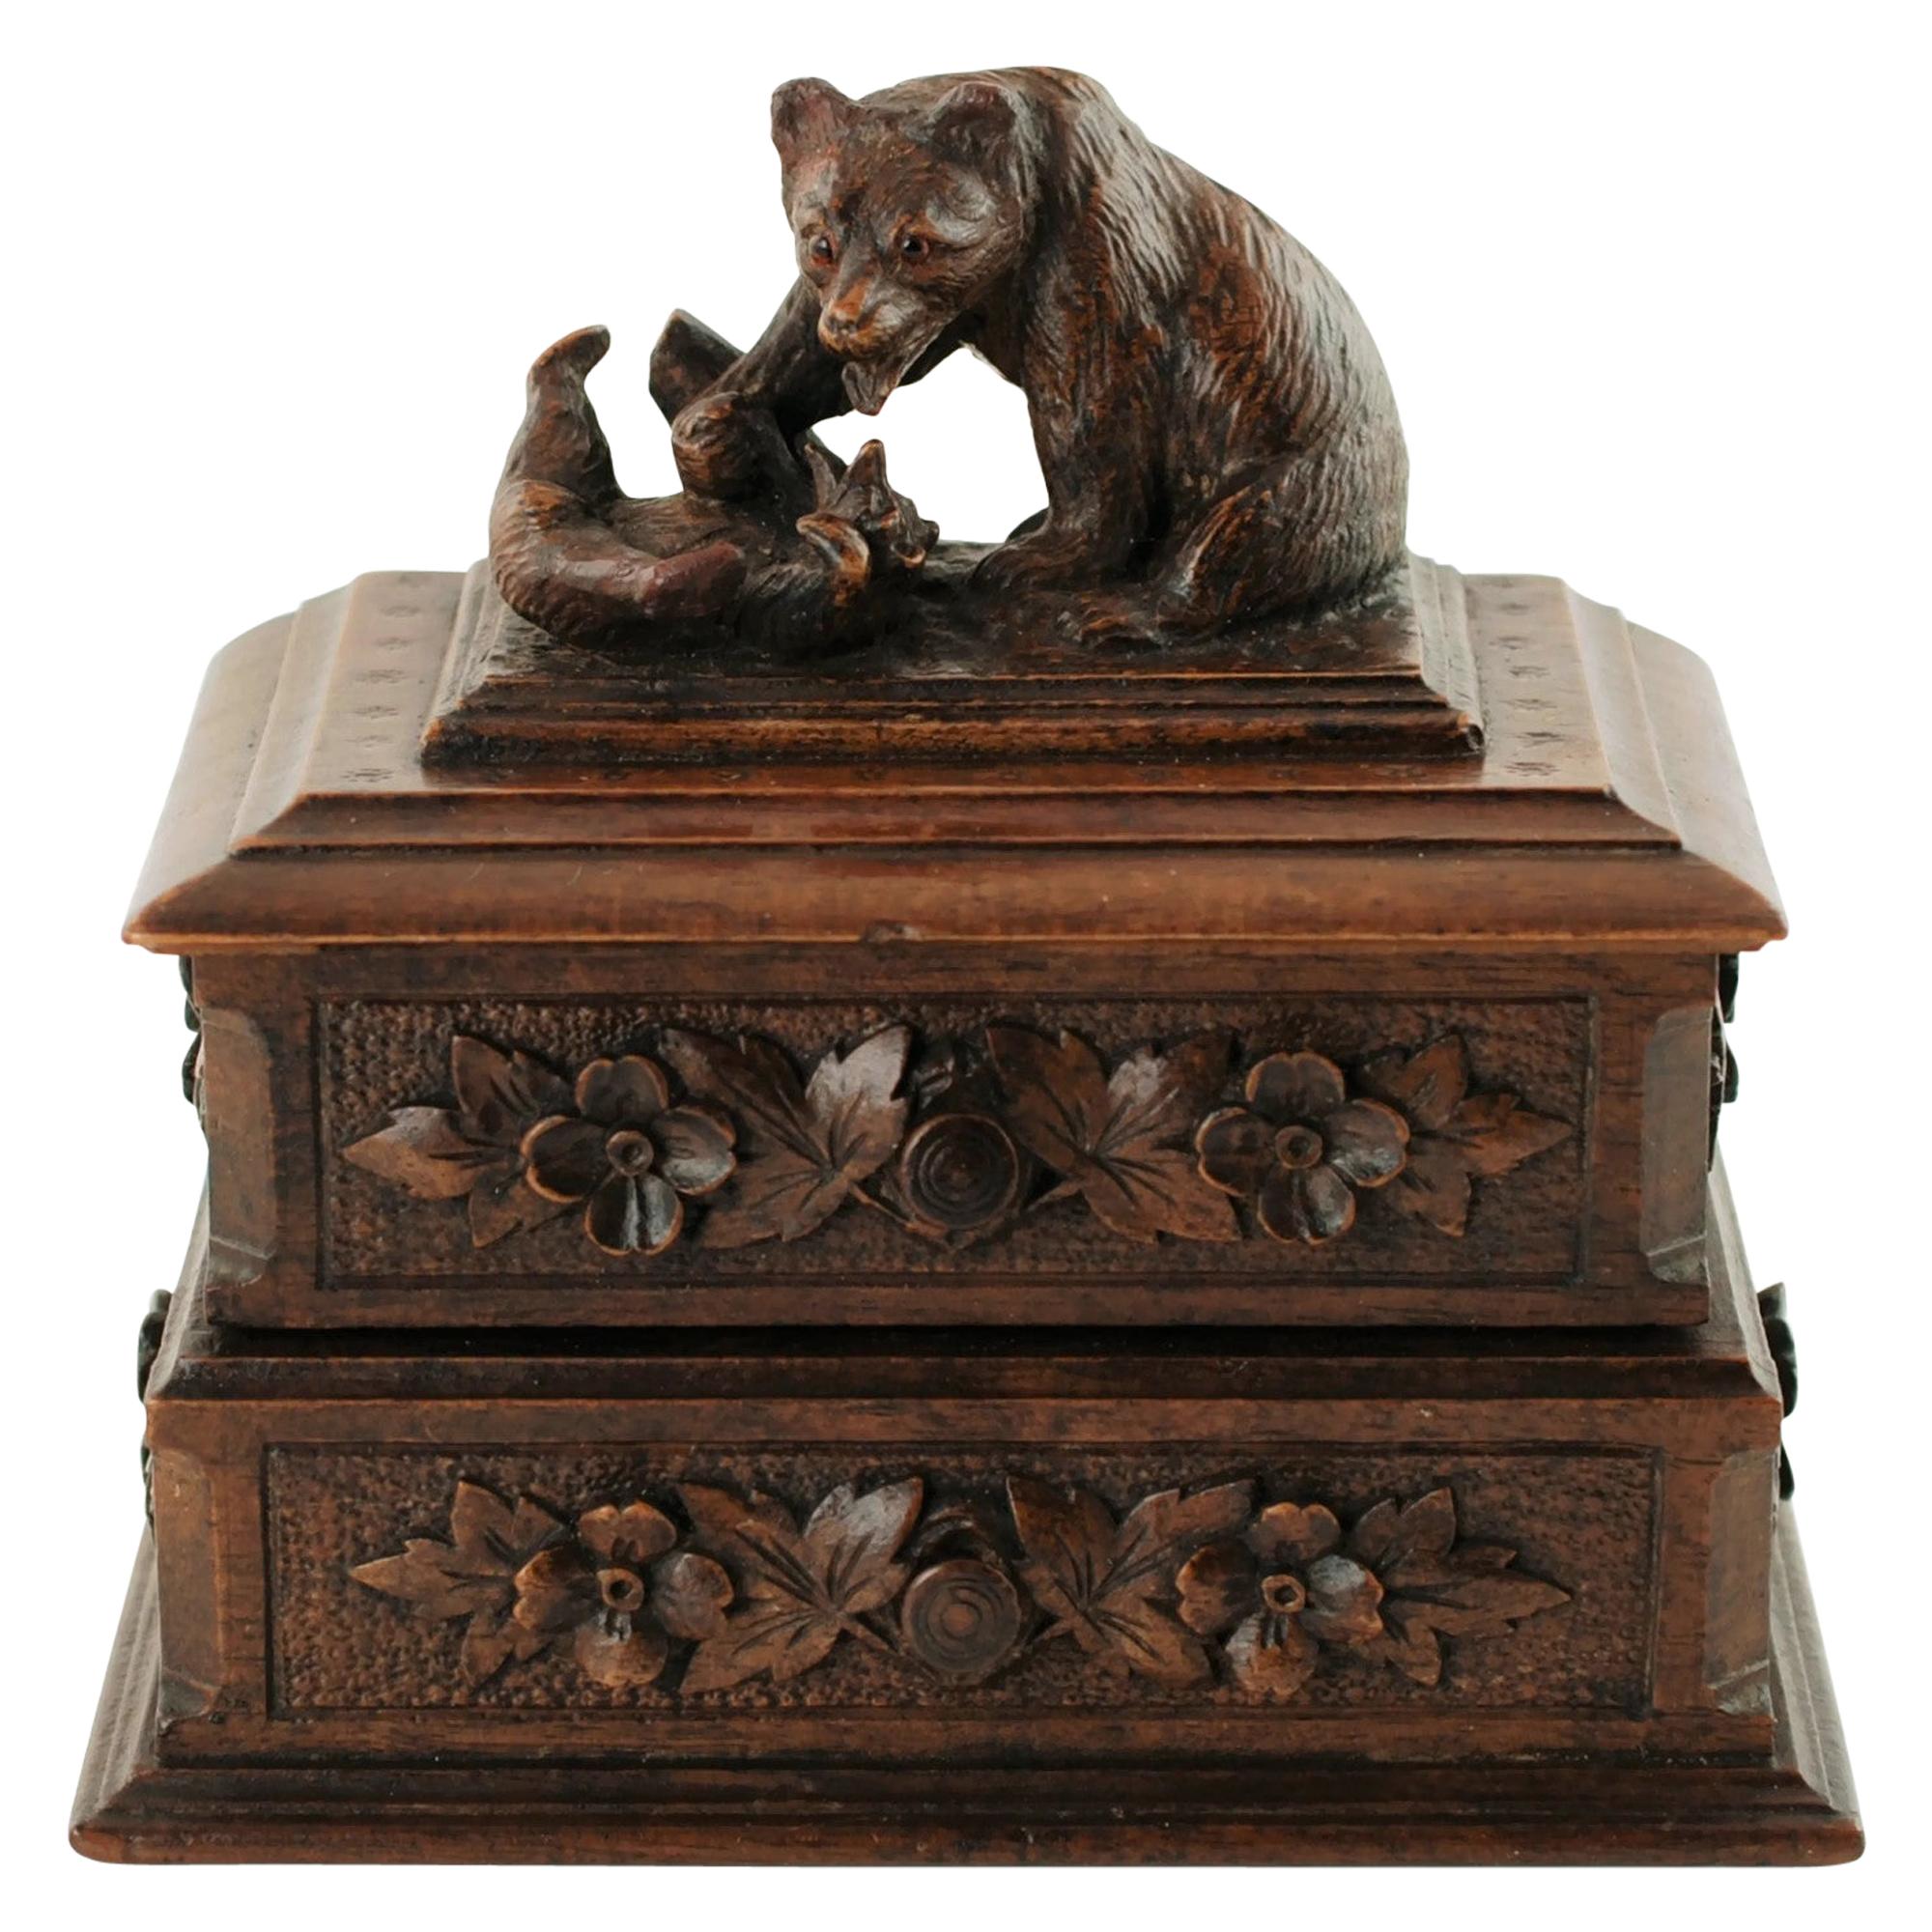 19th Century Black Forest Carved Bear Motif Wood Box with Swing-Out Compartment